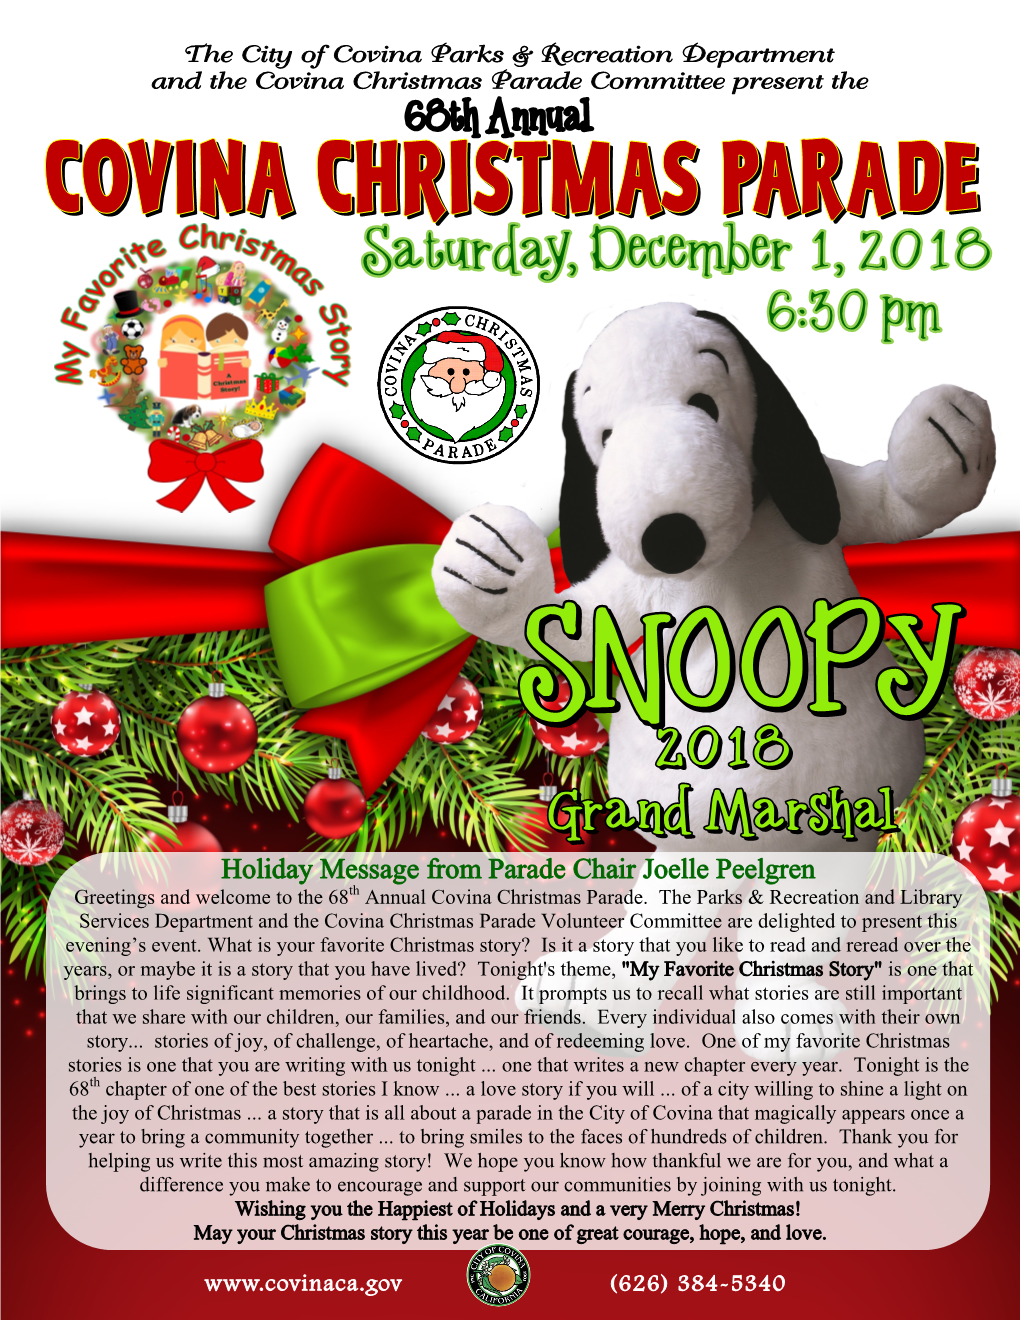 Holiday Message from Parade Chair Joelle Peelgren Greetings and Welcome to the 68Th Annual Covina Christmas Parade